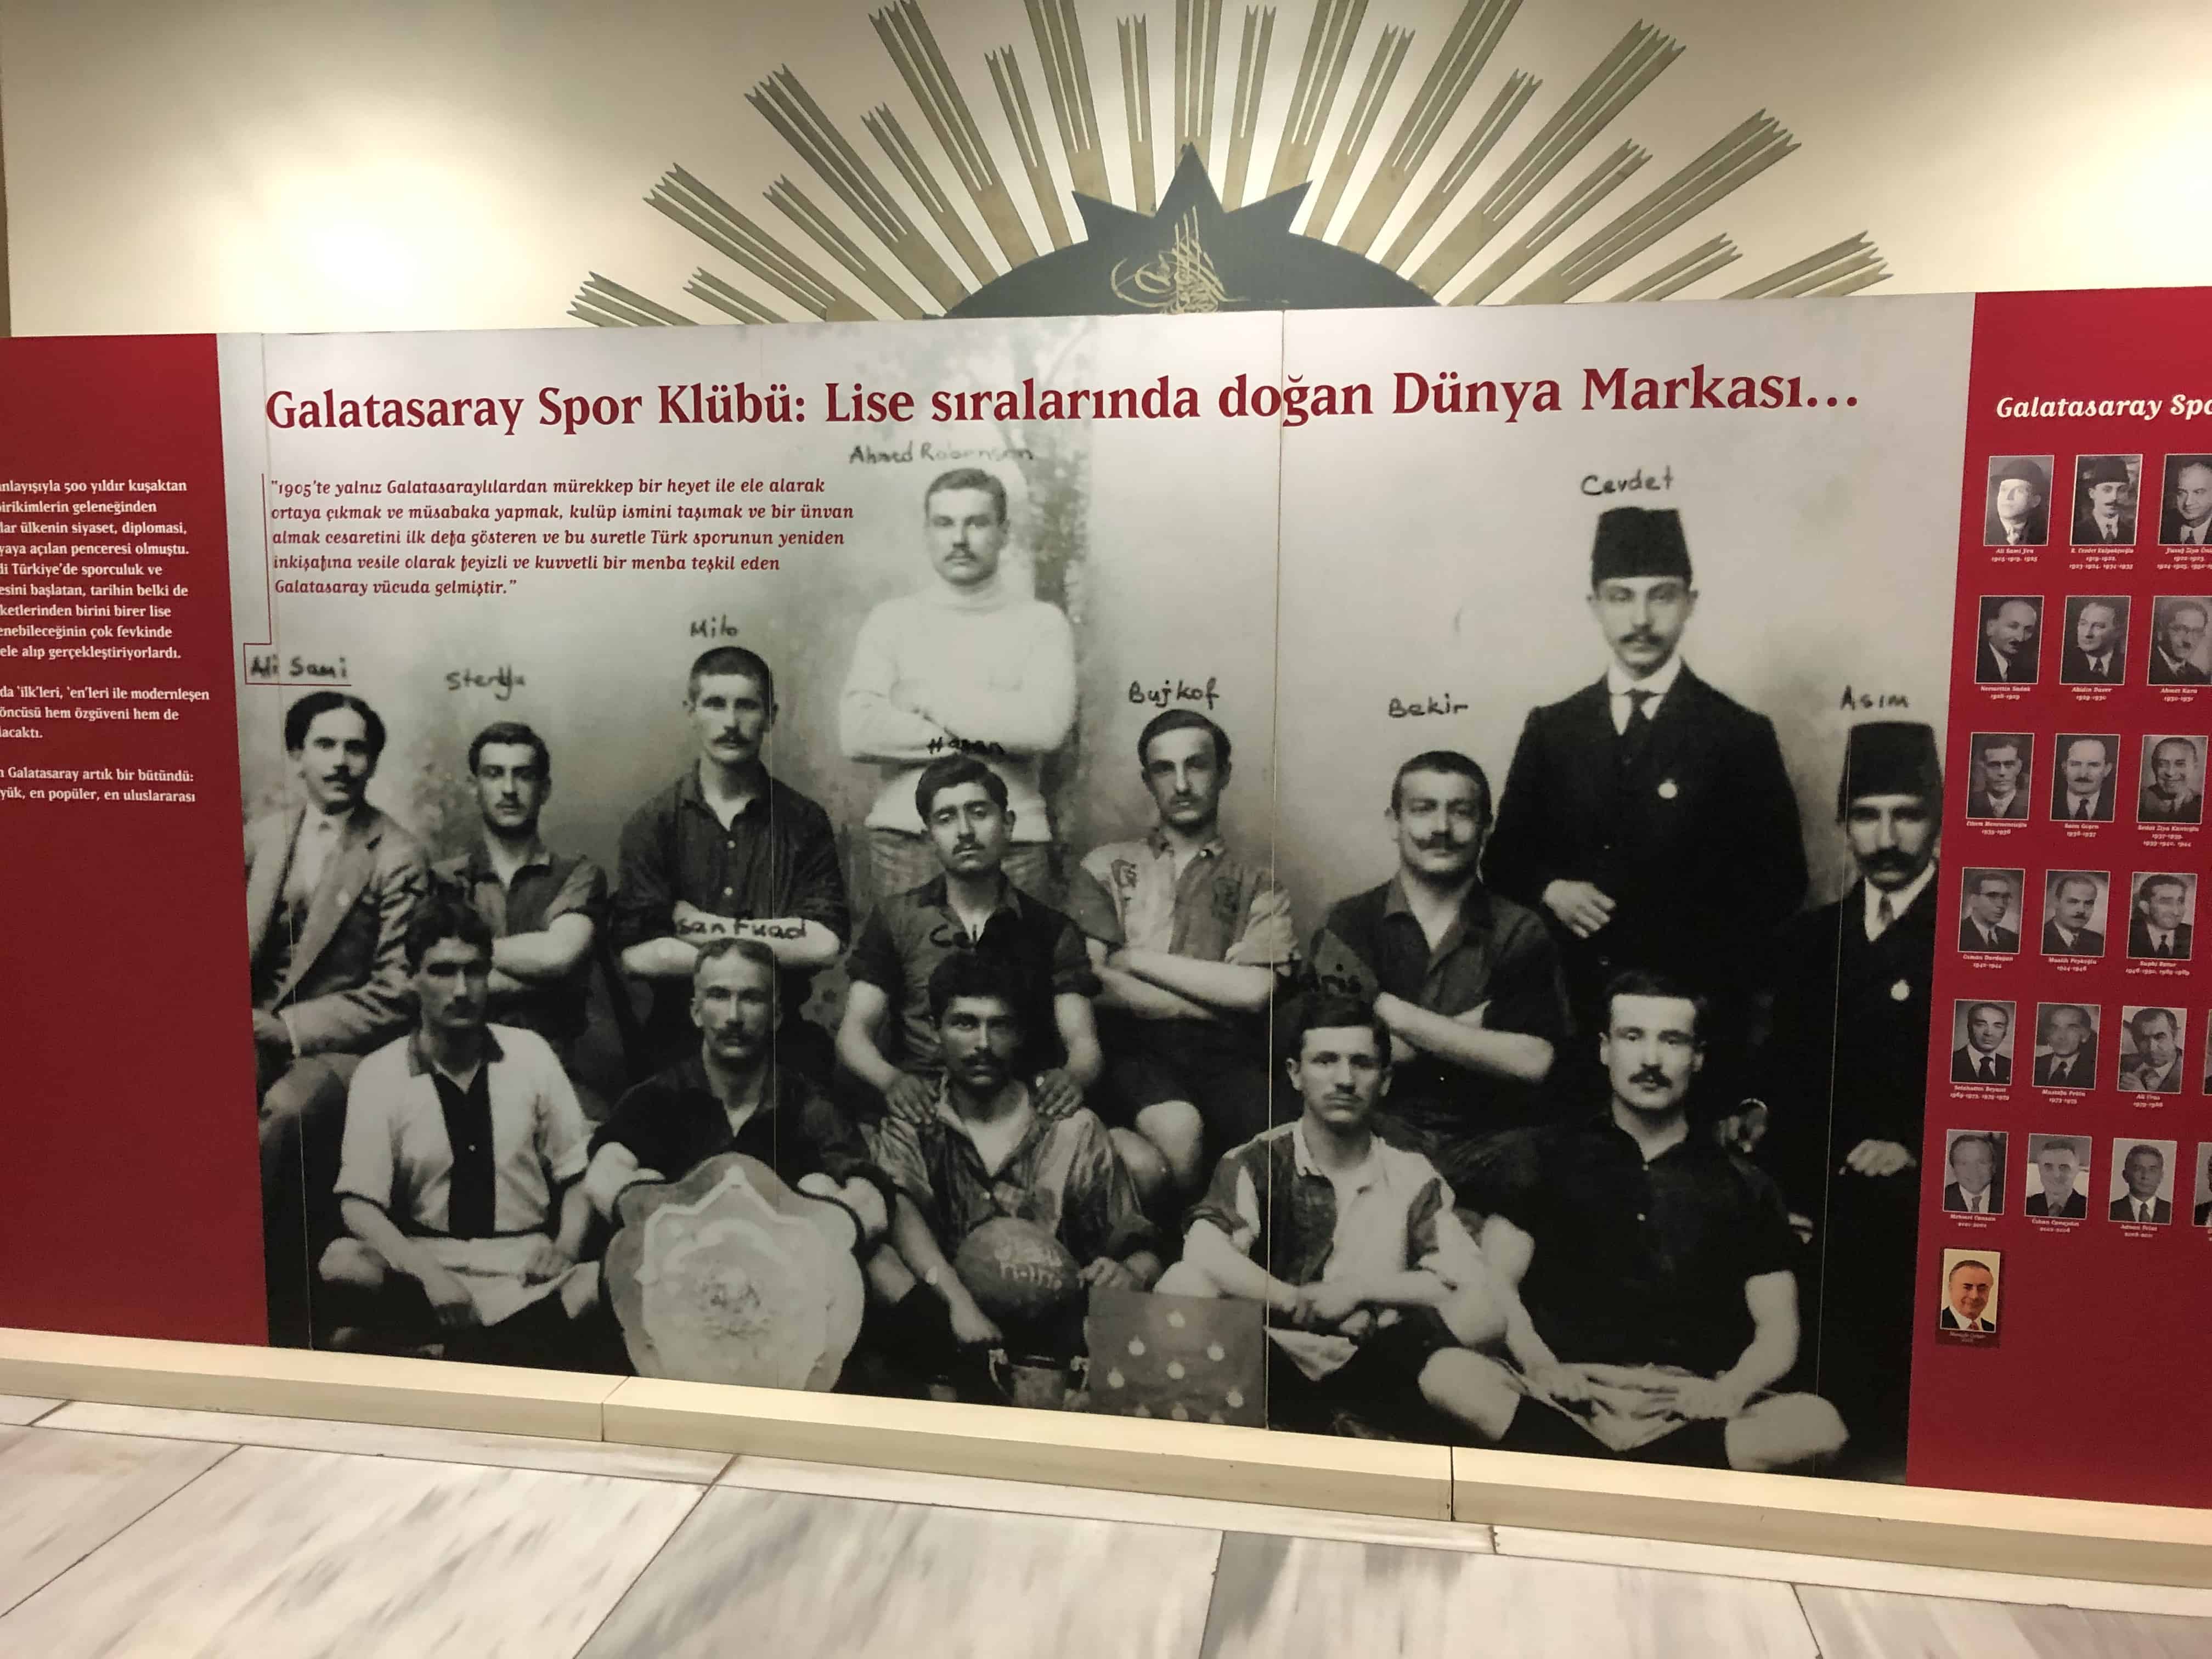 Founders of Galatasaray Sports Club at the Galatasaray Museum in Istanbul, Turkey